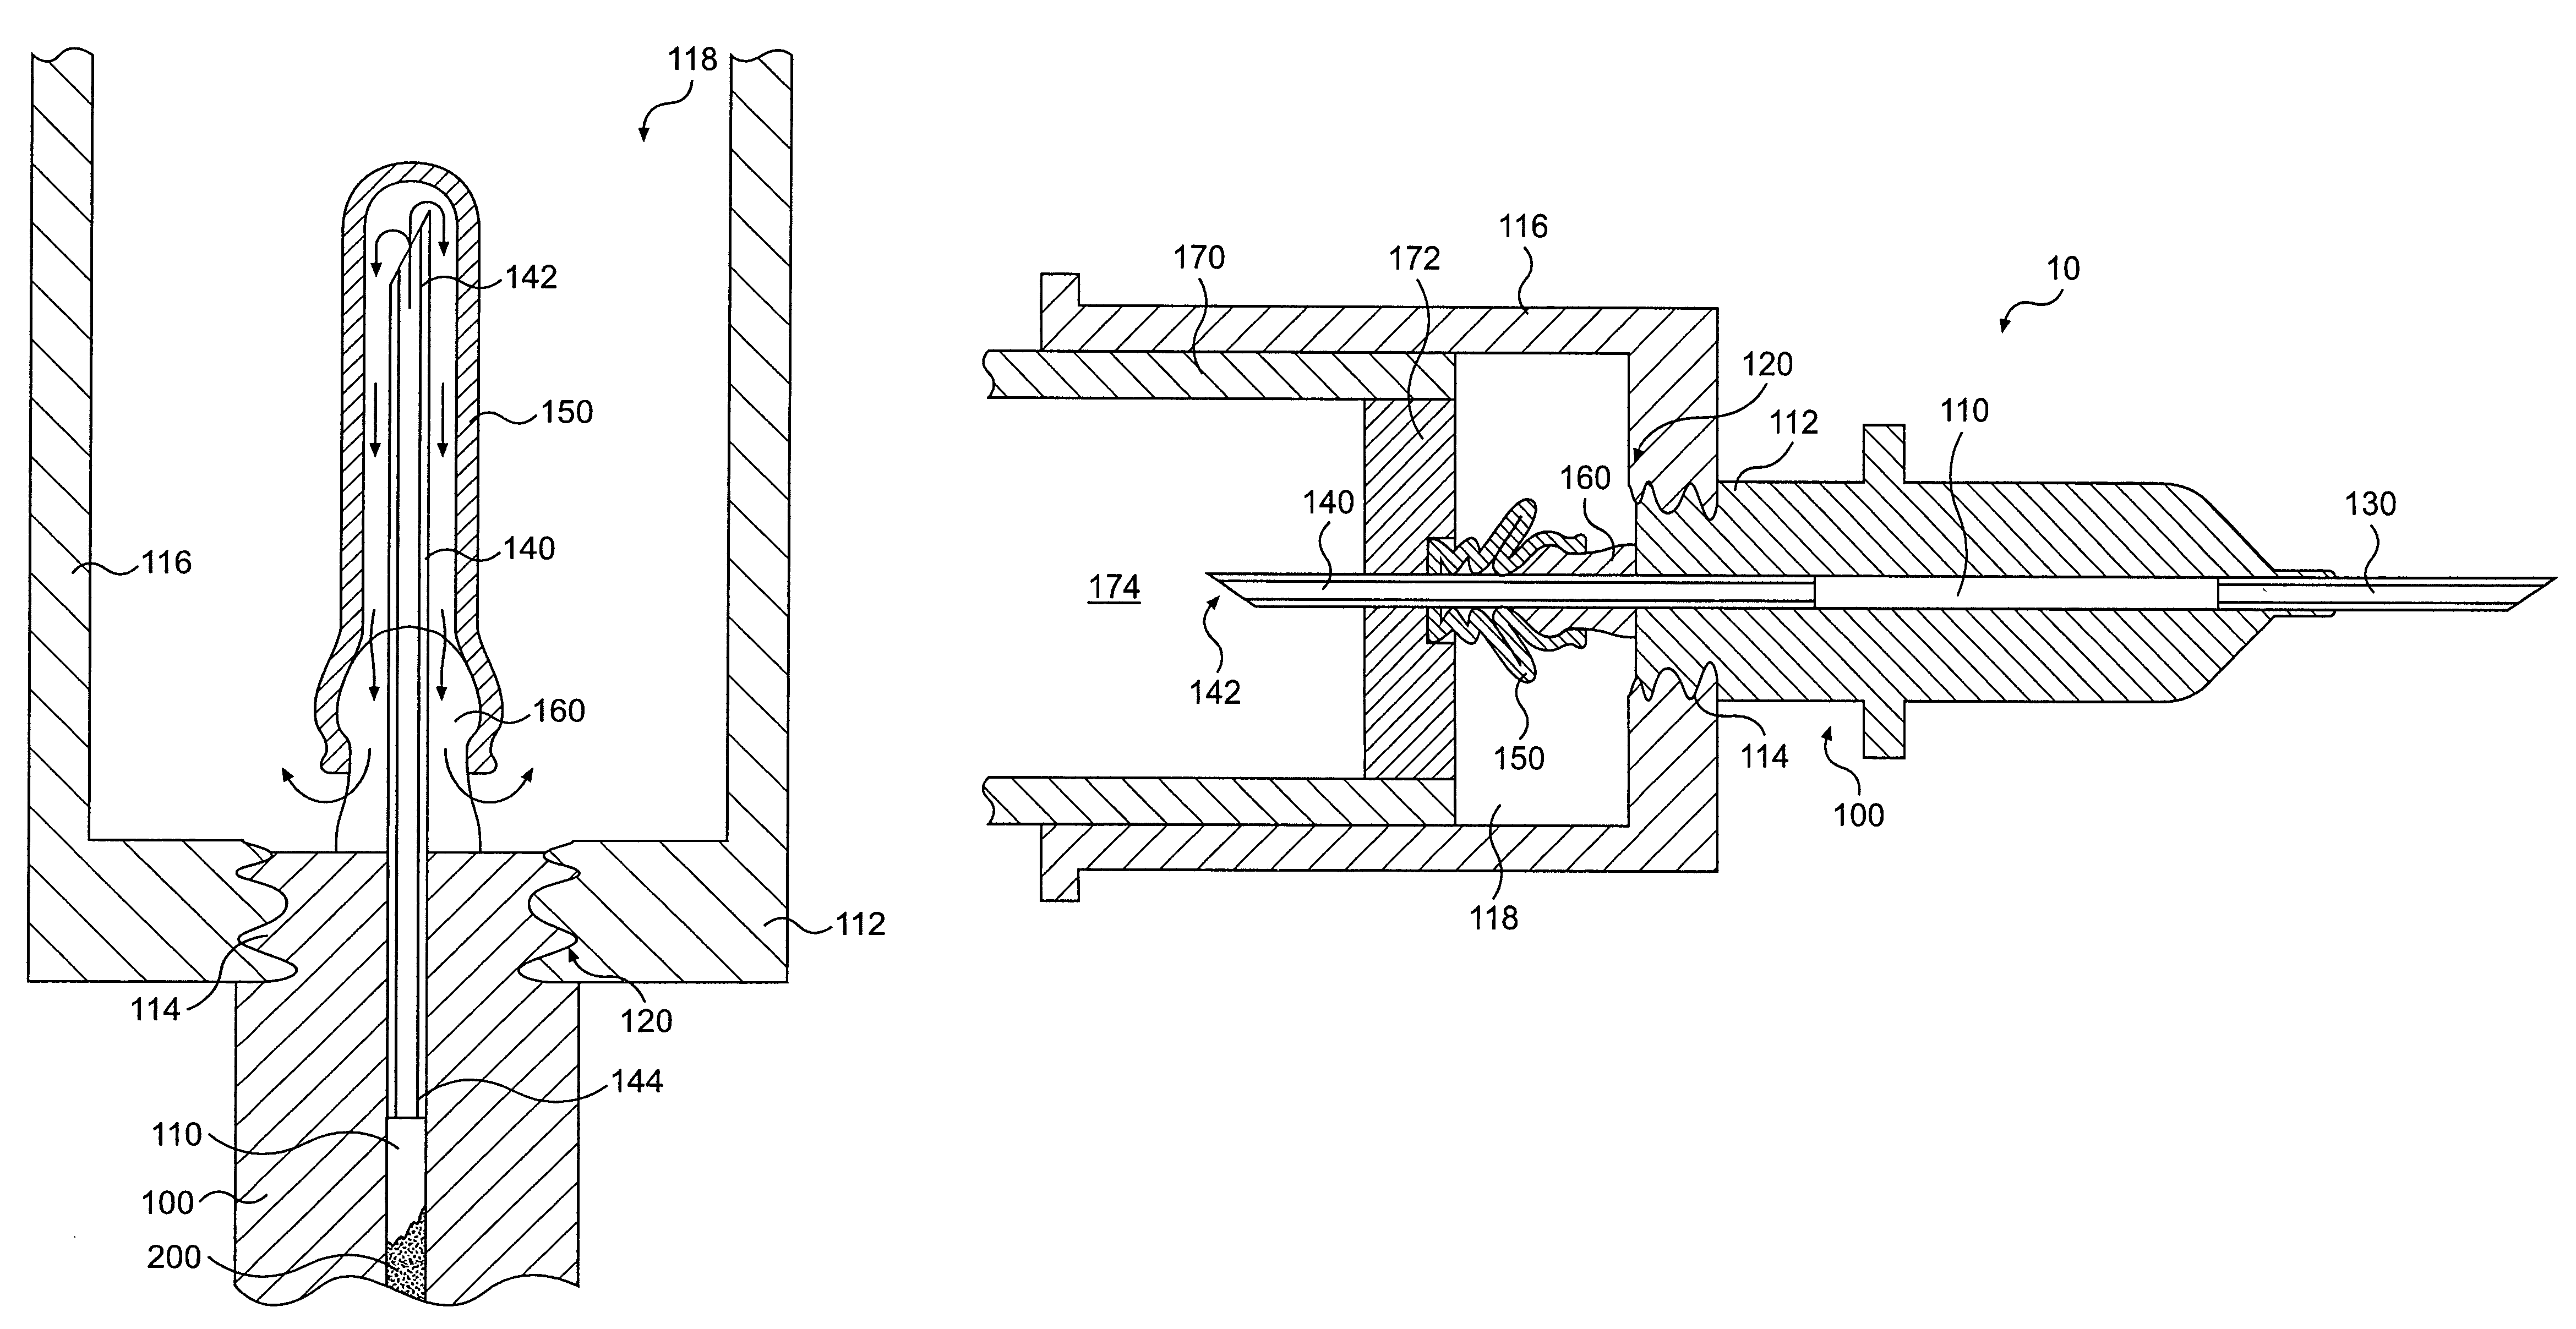 Blood drawing device with flash detection